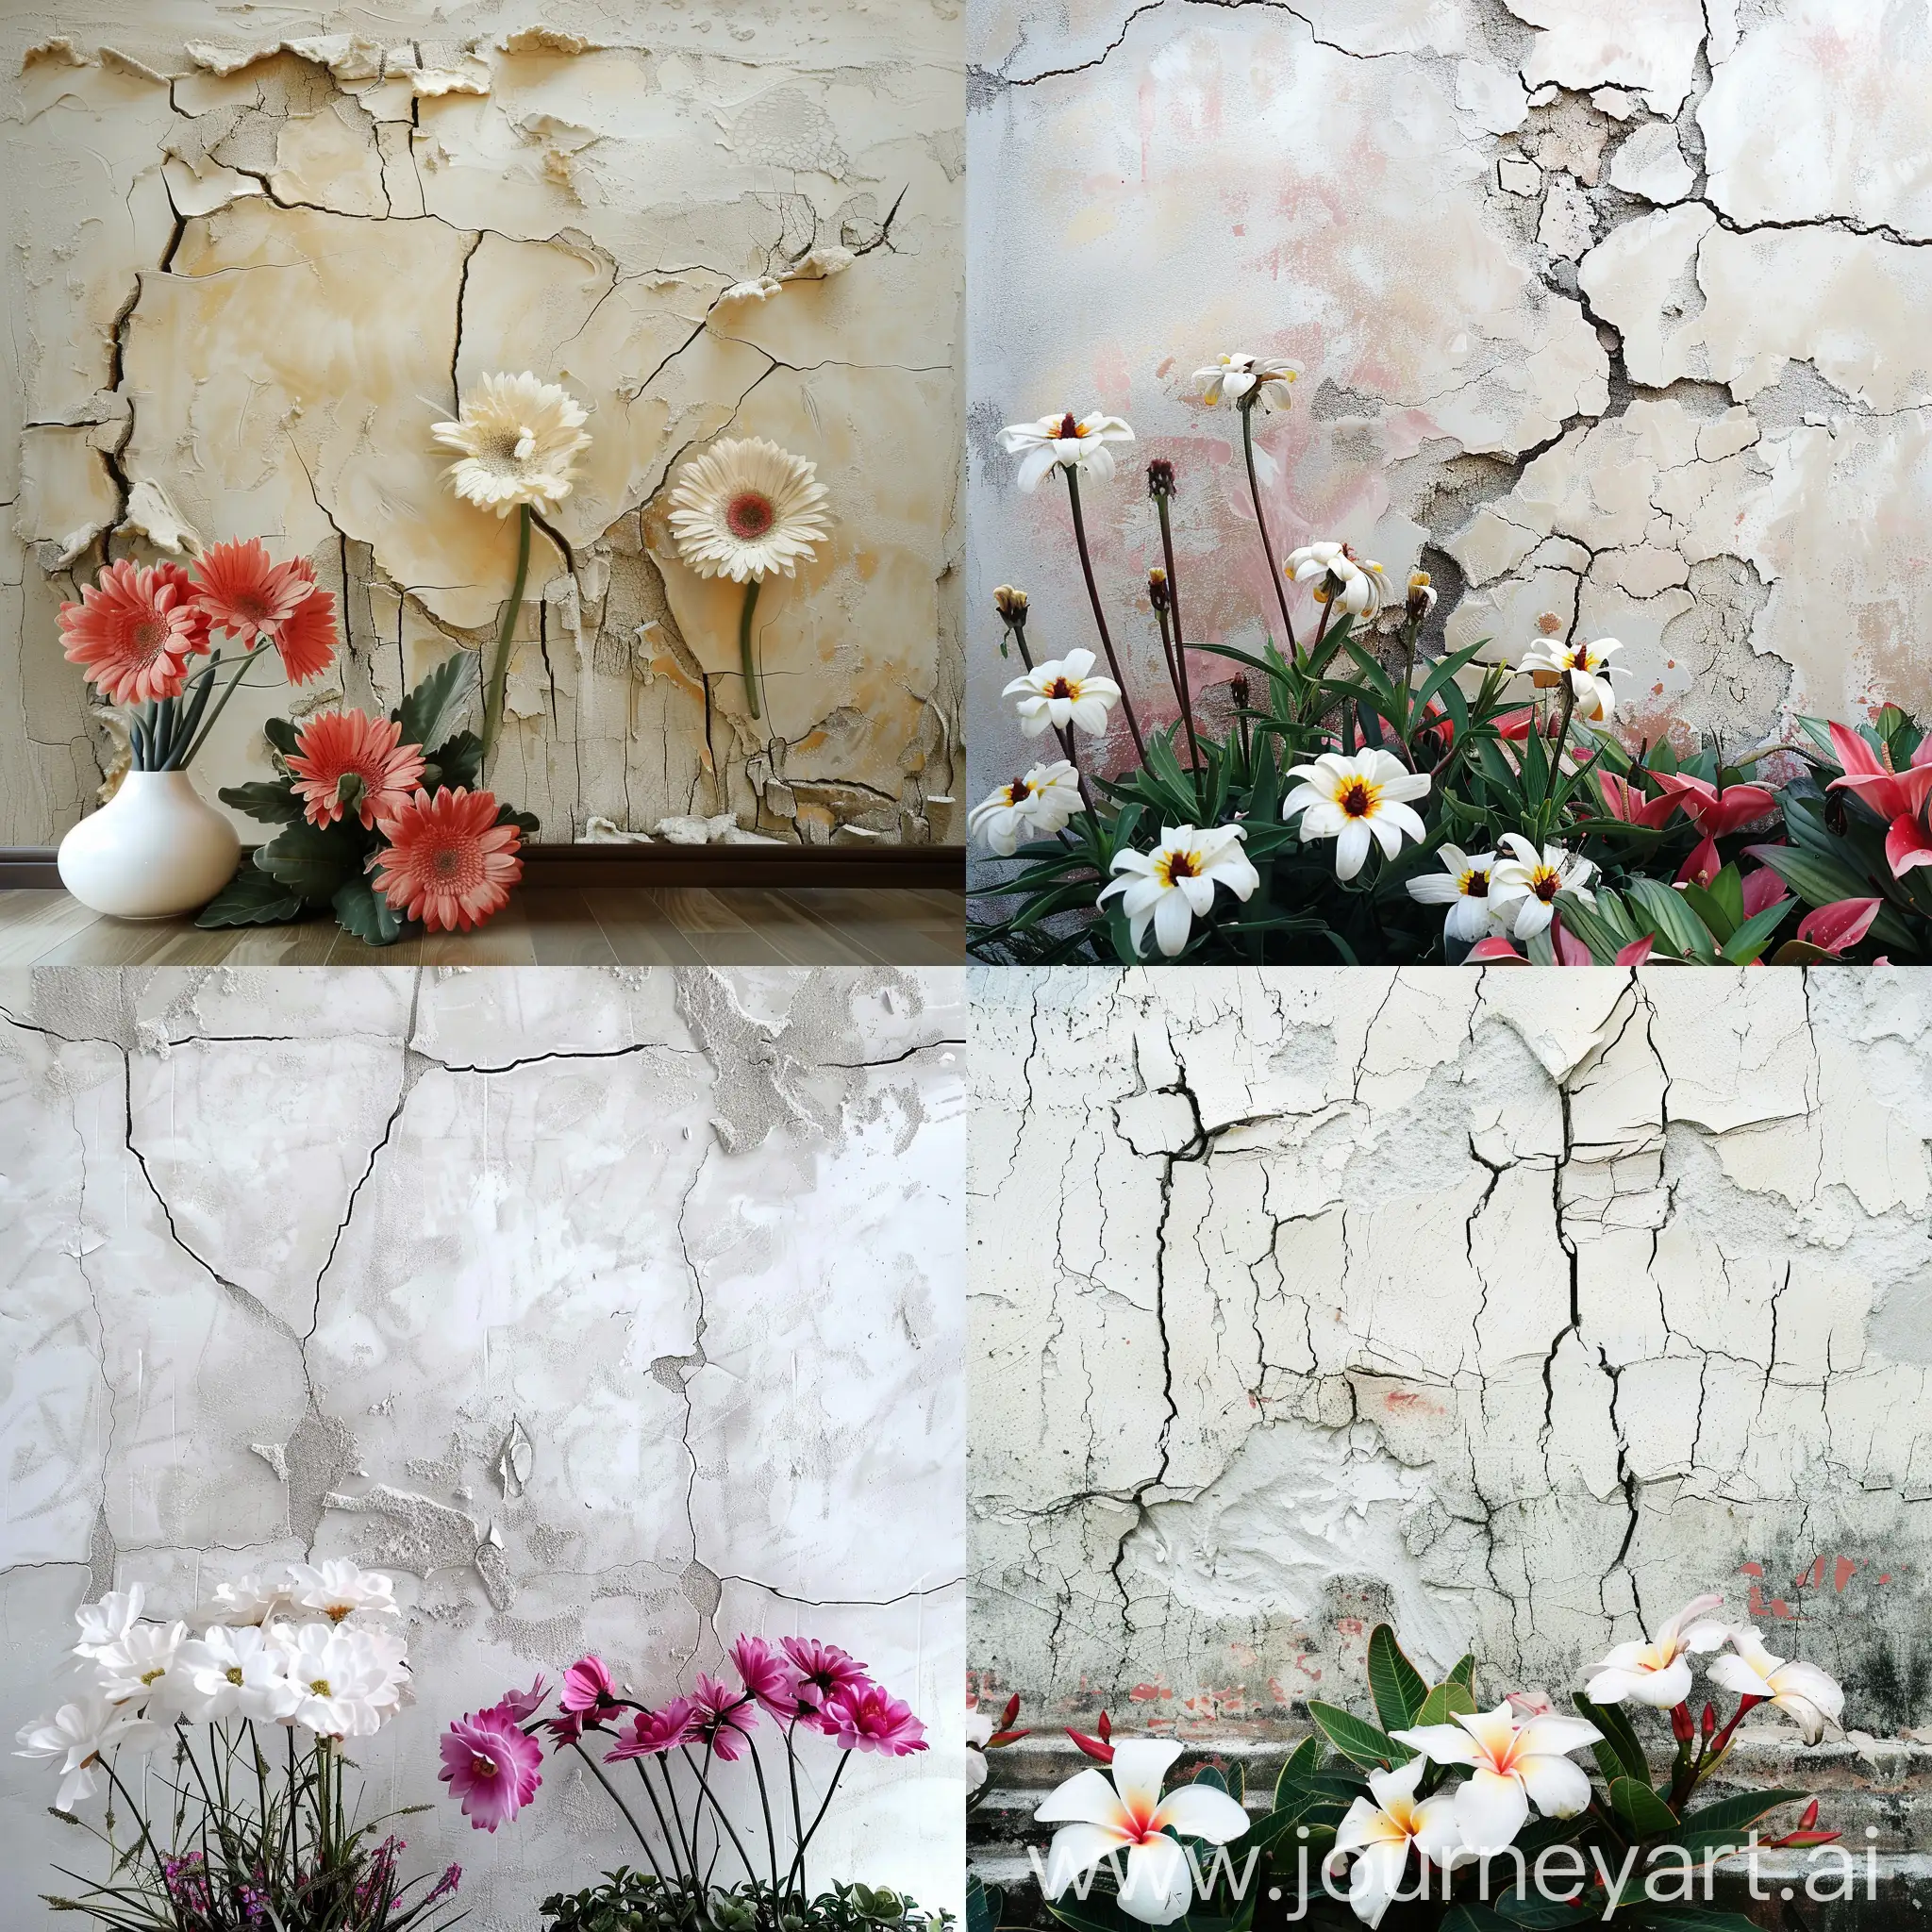 Textured-Plaster-Wall-with-Fragments-and-Pink-Flowers